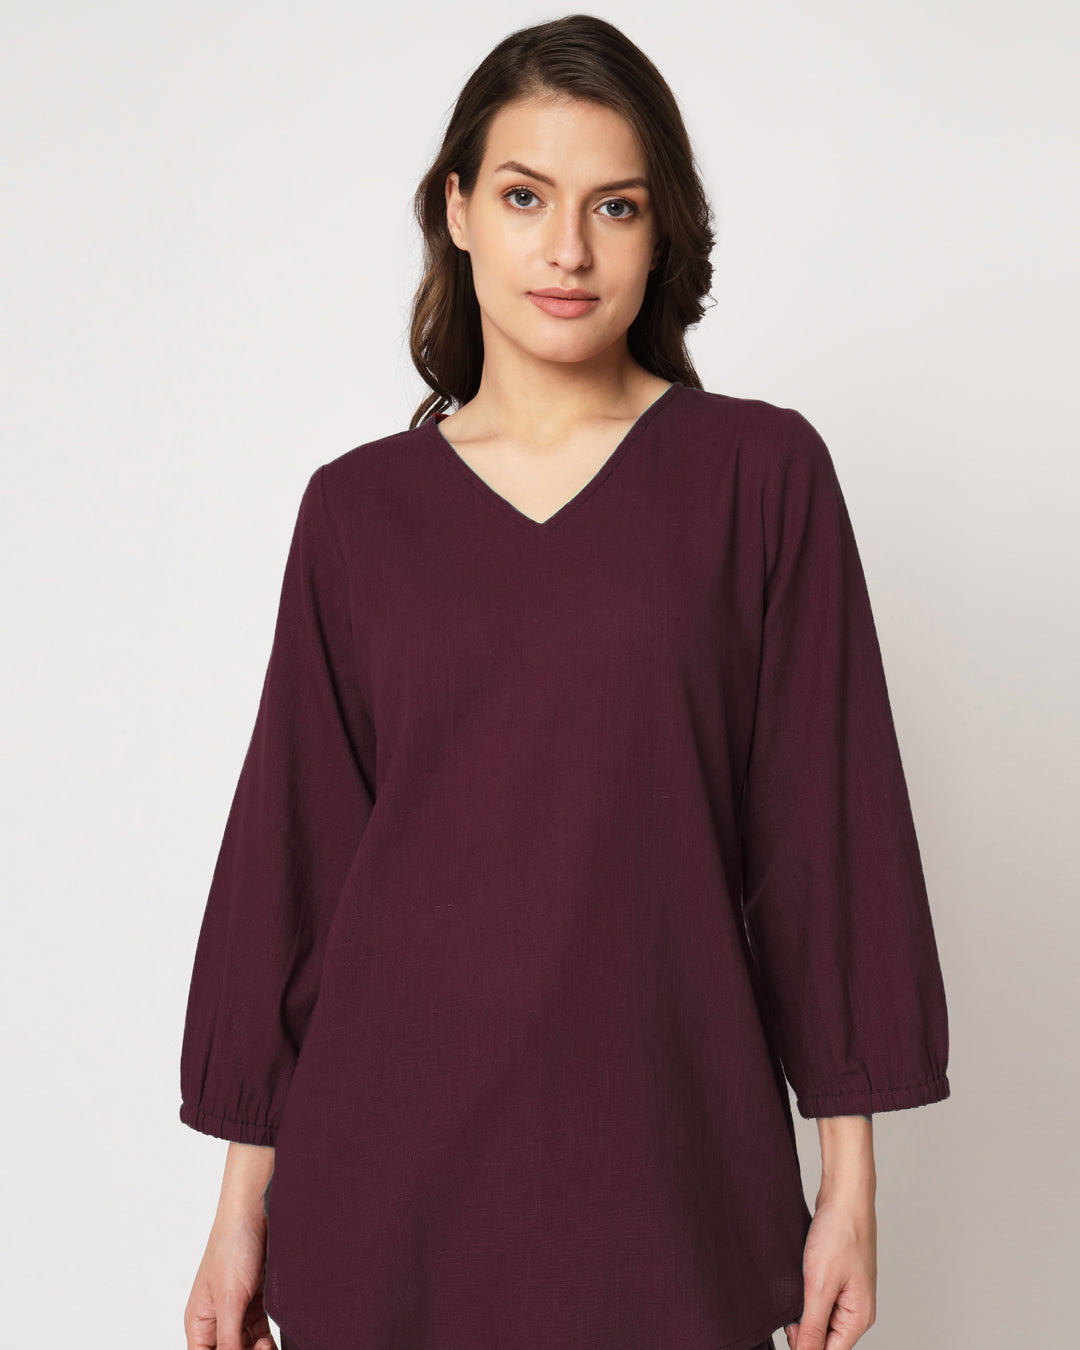 Plum Passion Bishop Sleeves Solid Top (Without Bottoms)